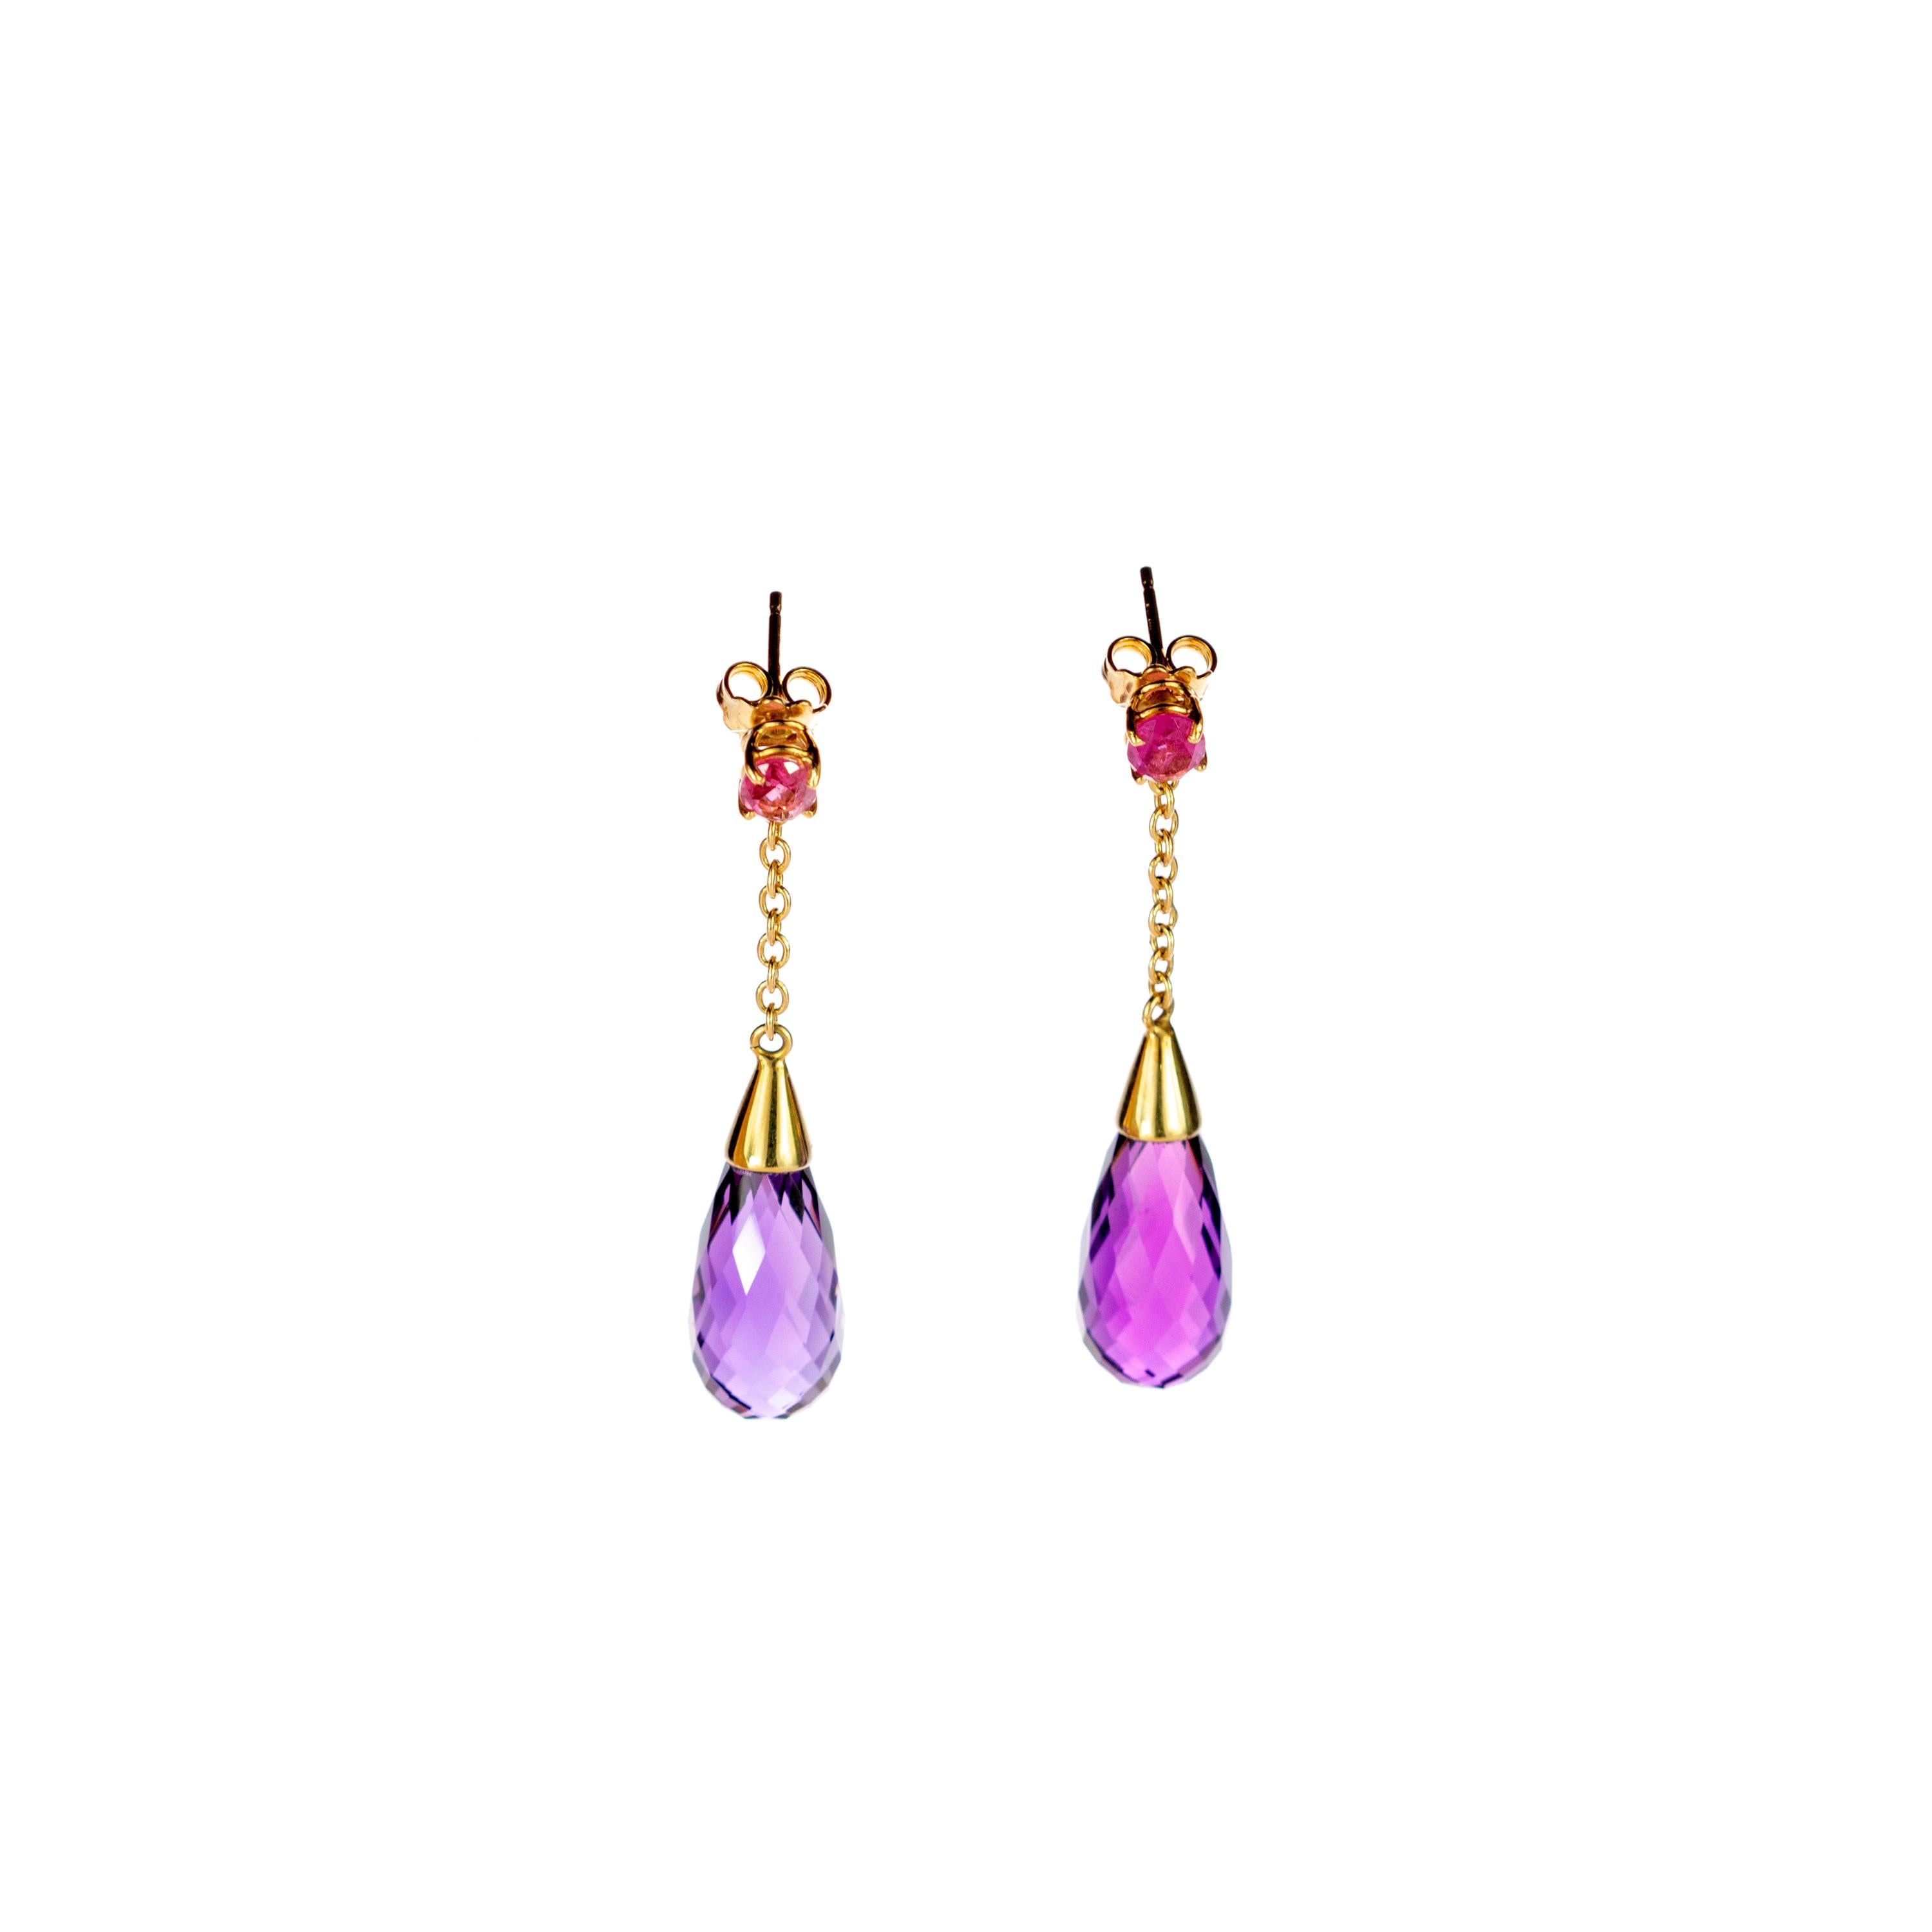 A breathtaking and sumptuous 2 carats tourmaline round pink earrings held by 18 karat yellow gold delicate chain to a deep purple 32 carats amethyst tear through a gold glamorous triangle. Modern briolette designs jewels that combine voluminous